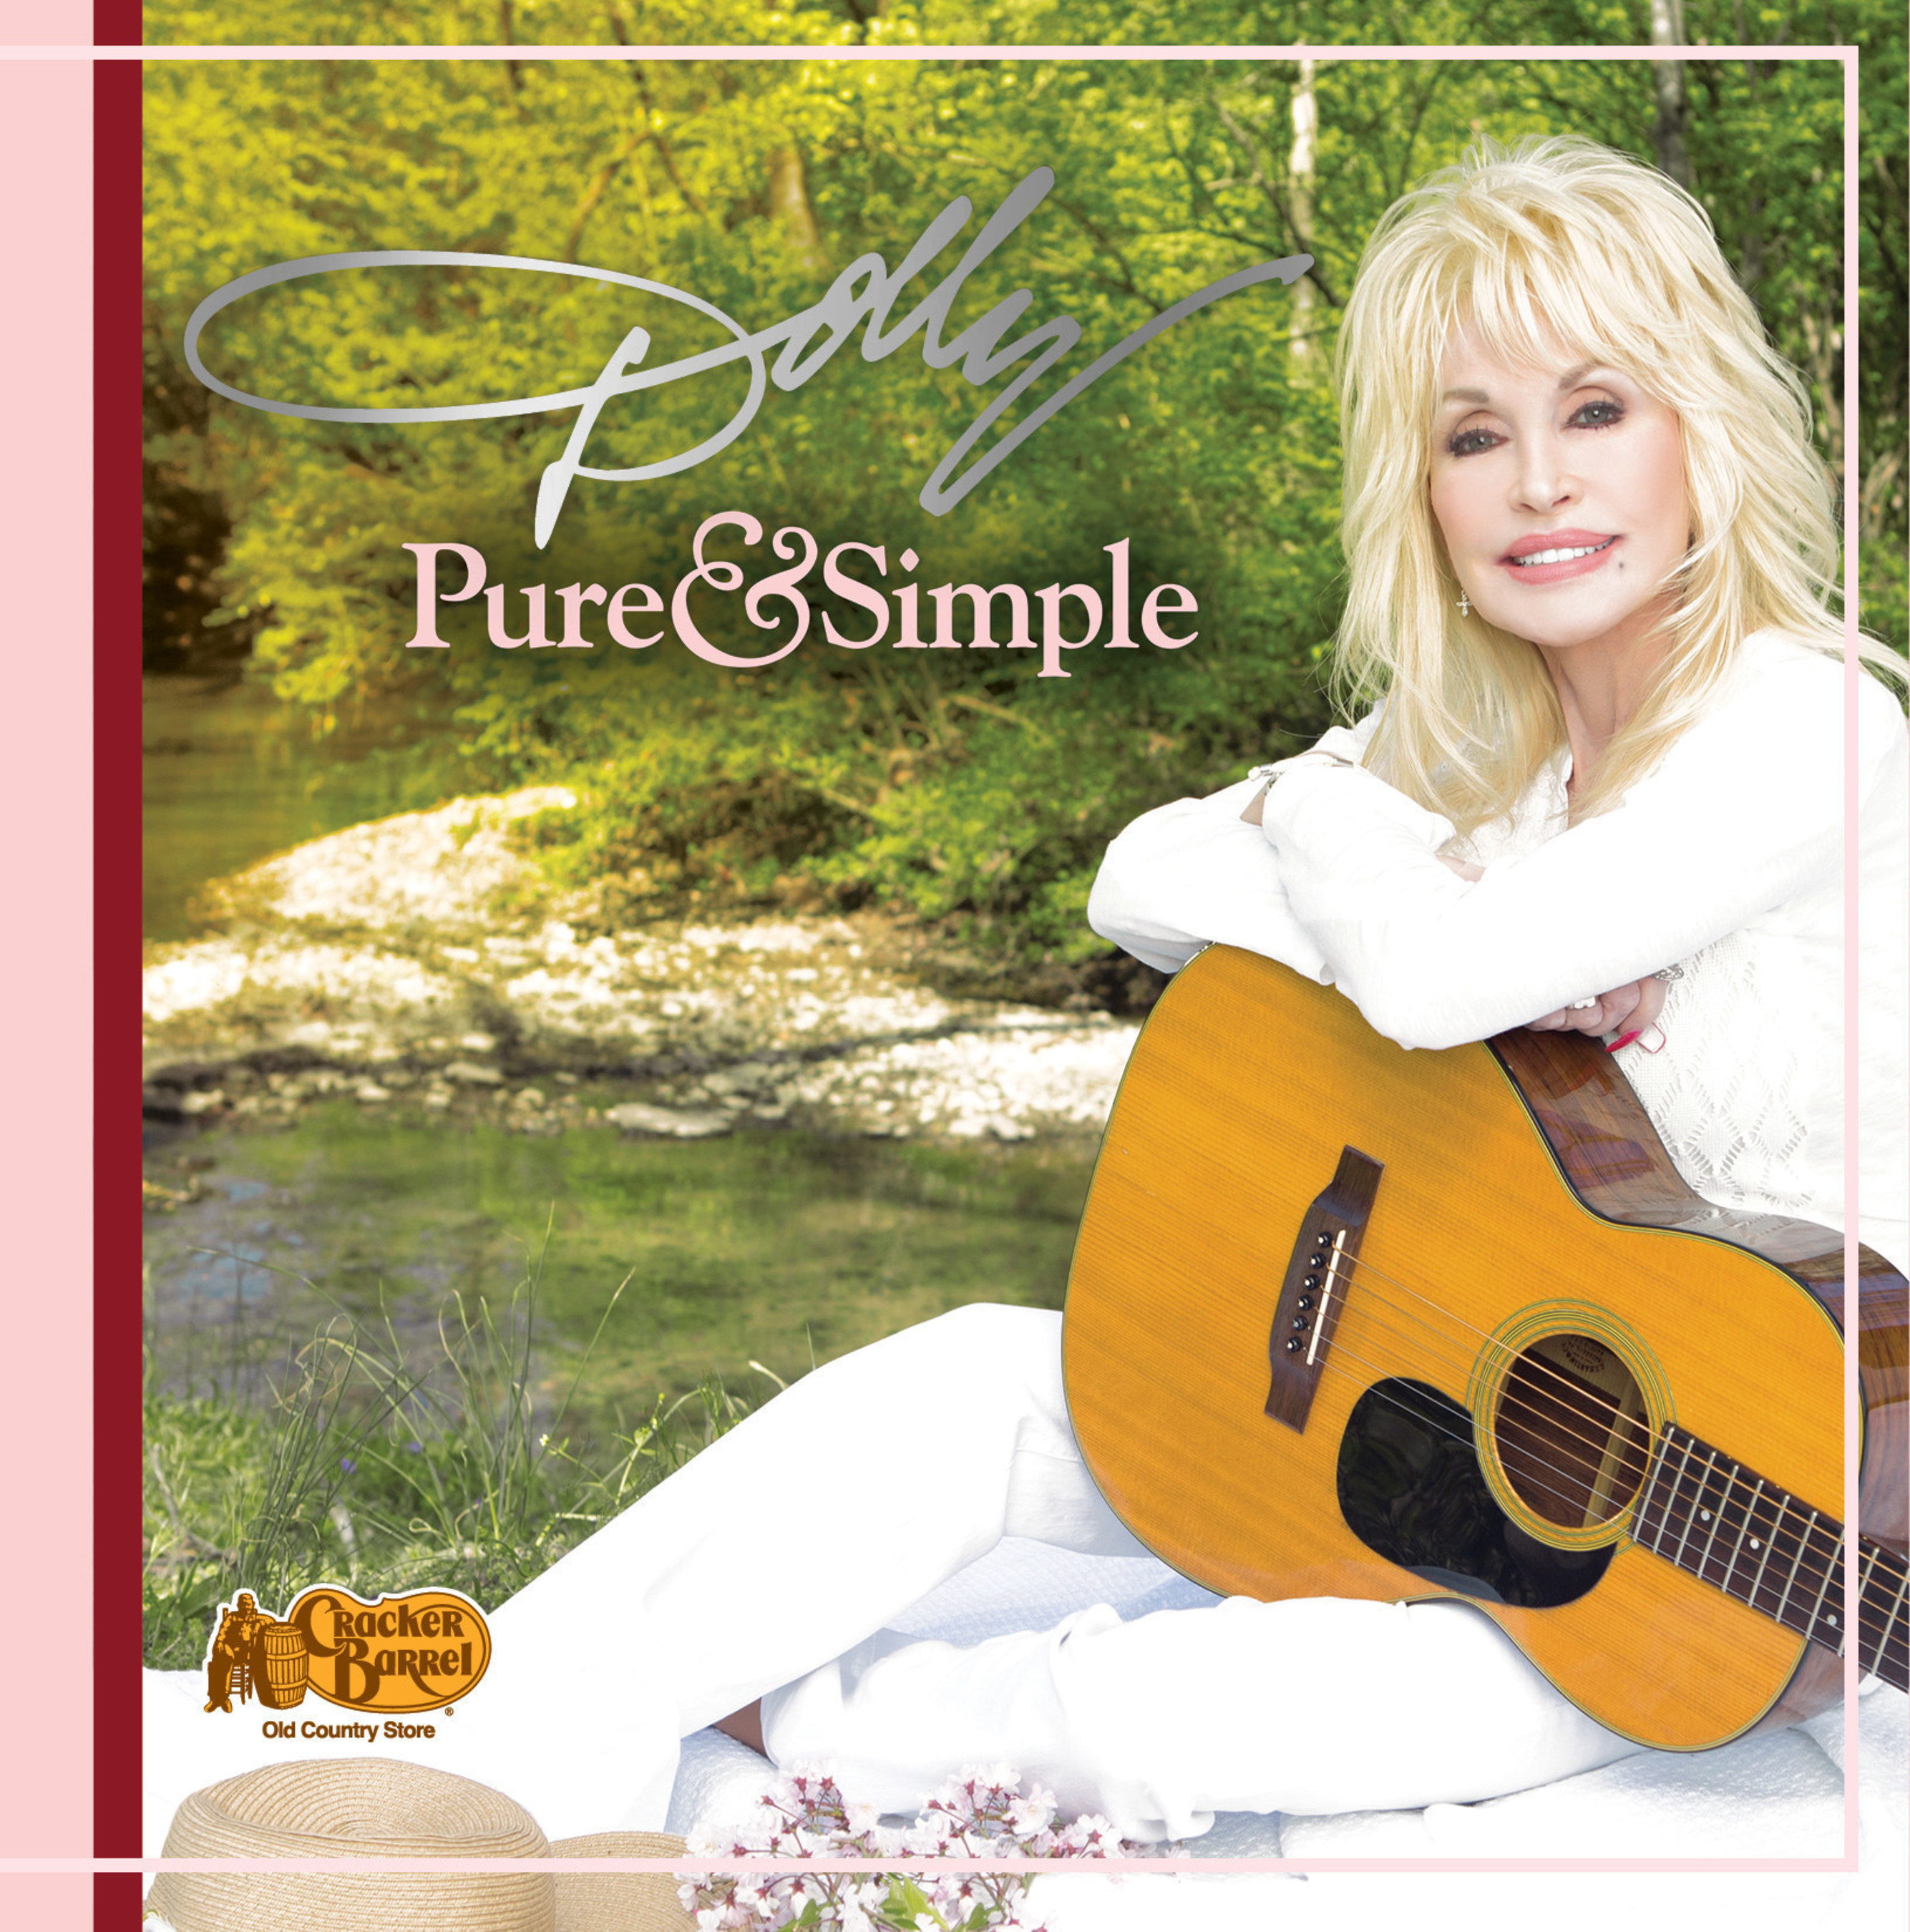 Dolly Parton's deluxe version of "Pure & Simple" is available exclusively at Cracker Barrel Old Country Stores nationwide and online at crackerbarrel.com.